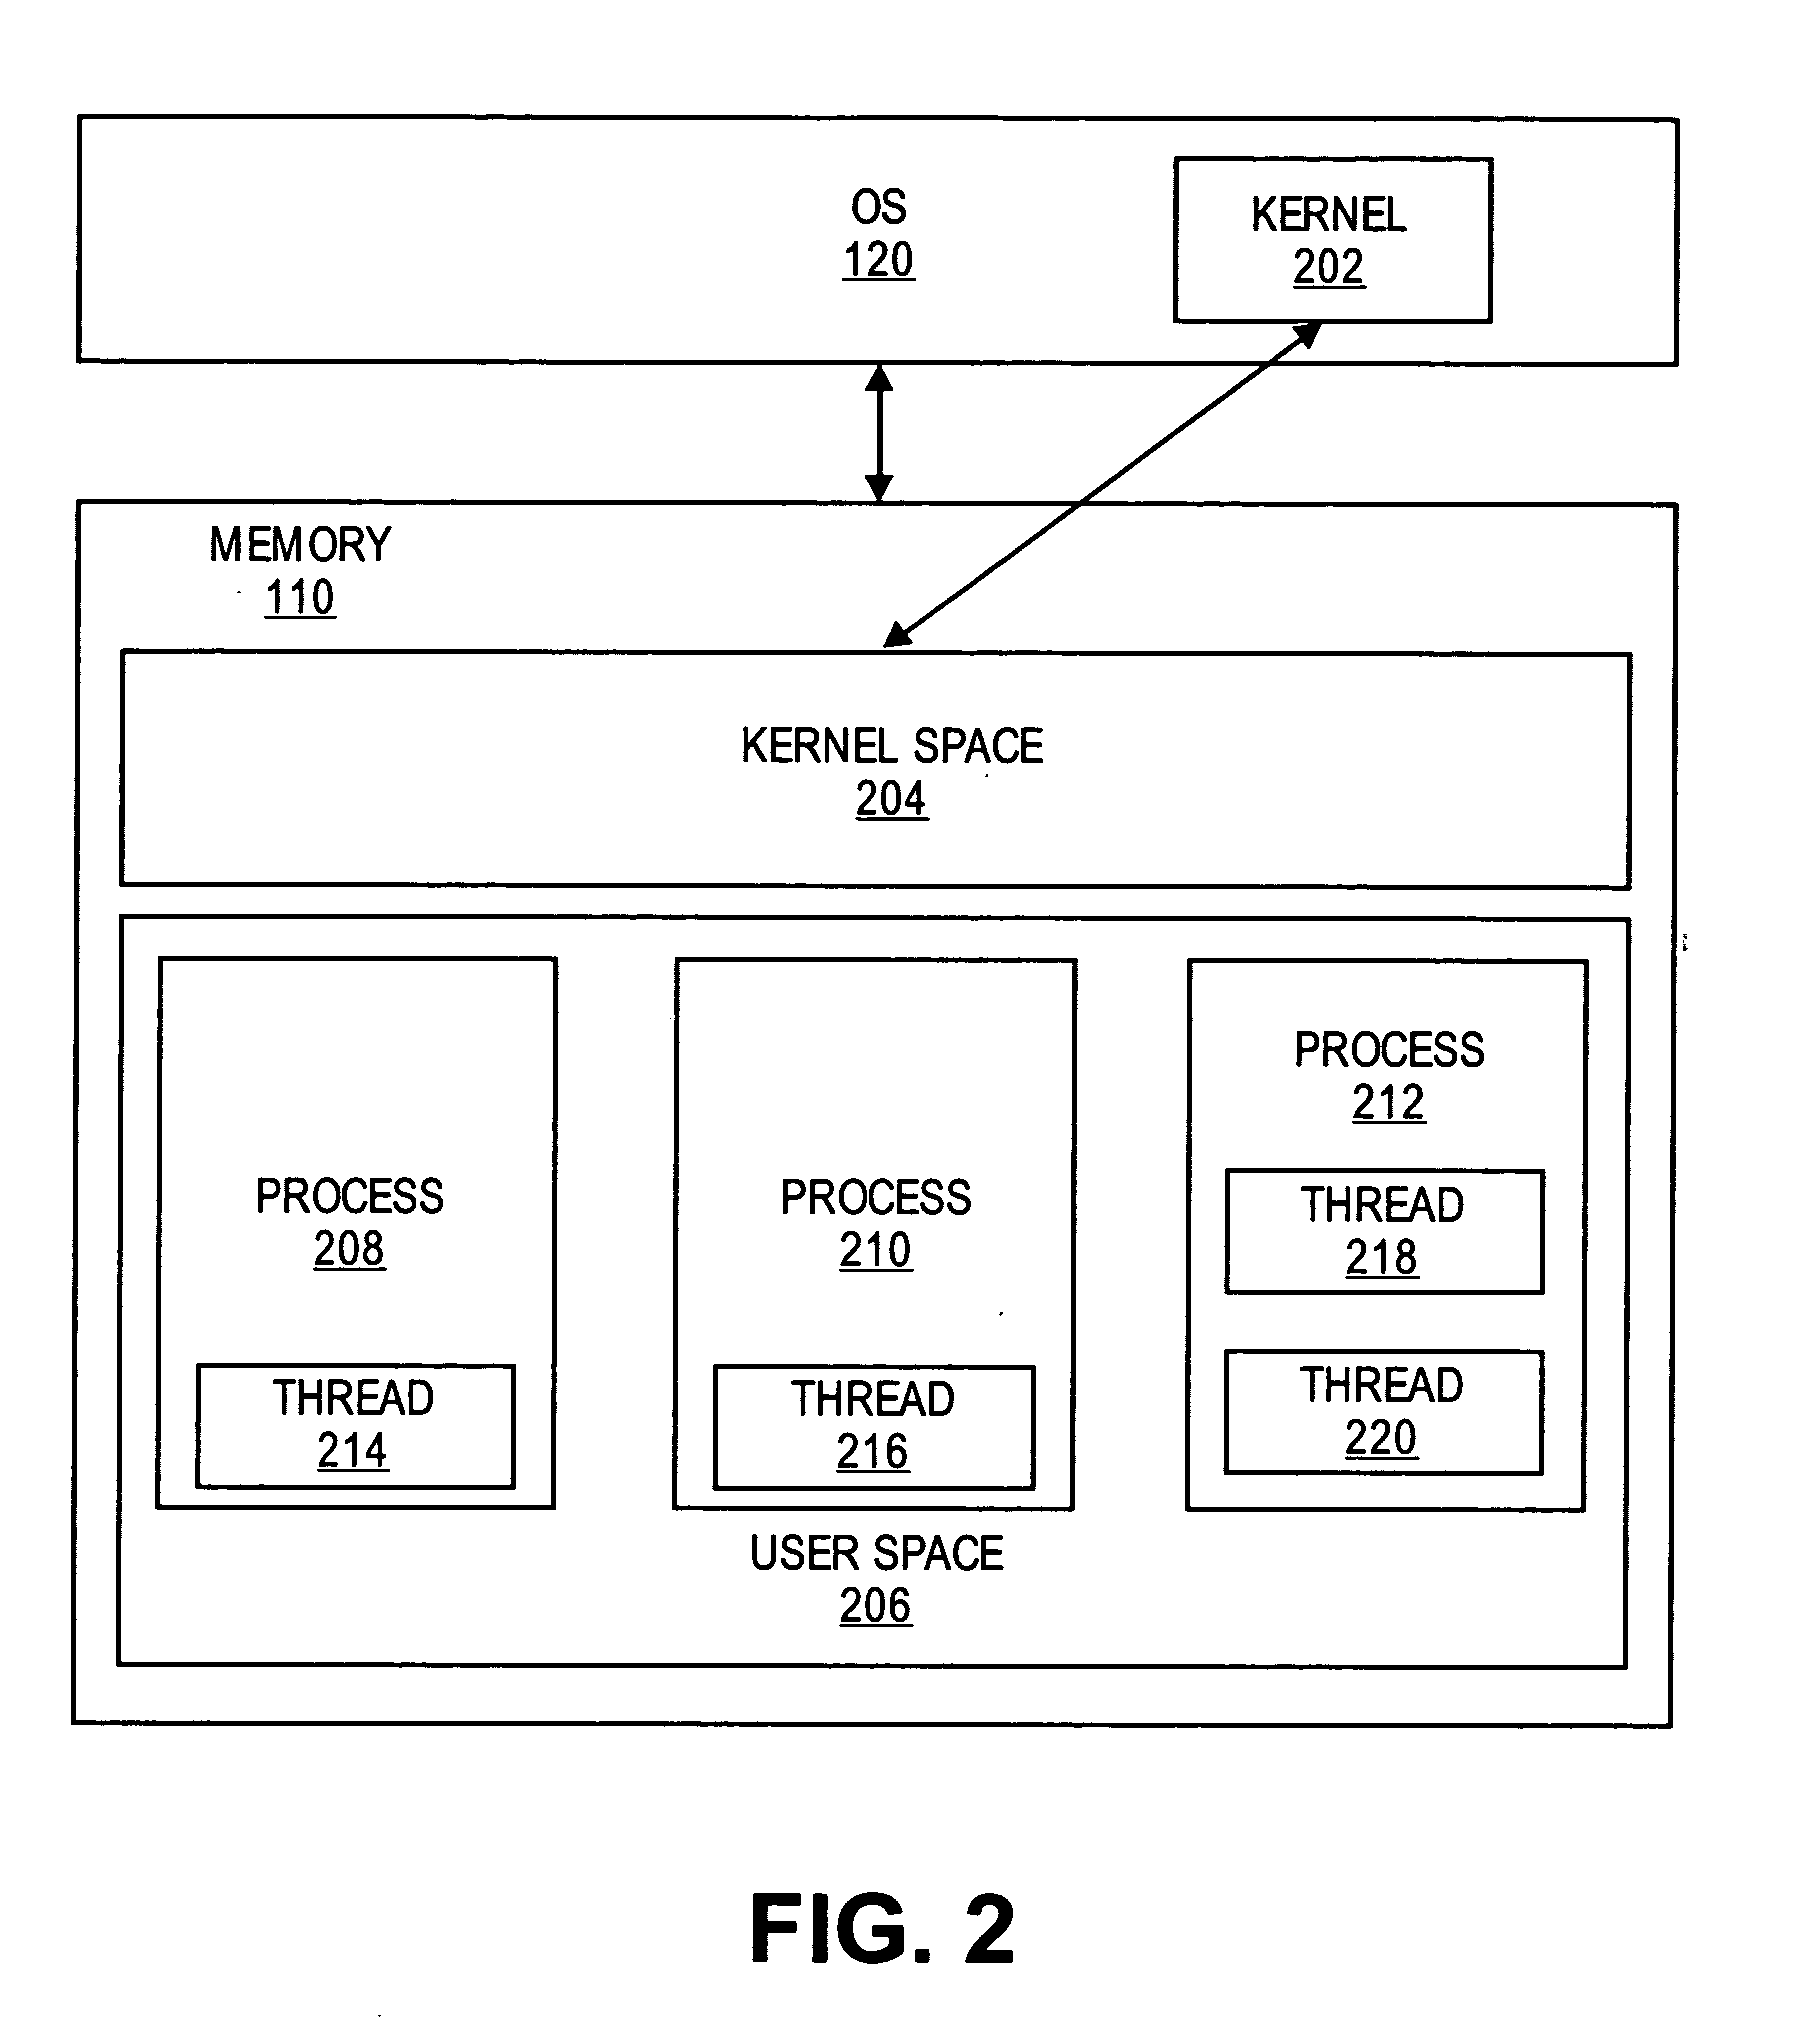 Methods and systems for scheduling processes in a multi-core processor environment